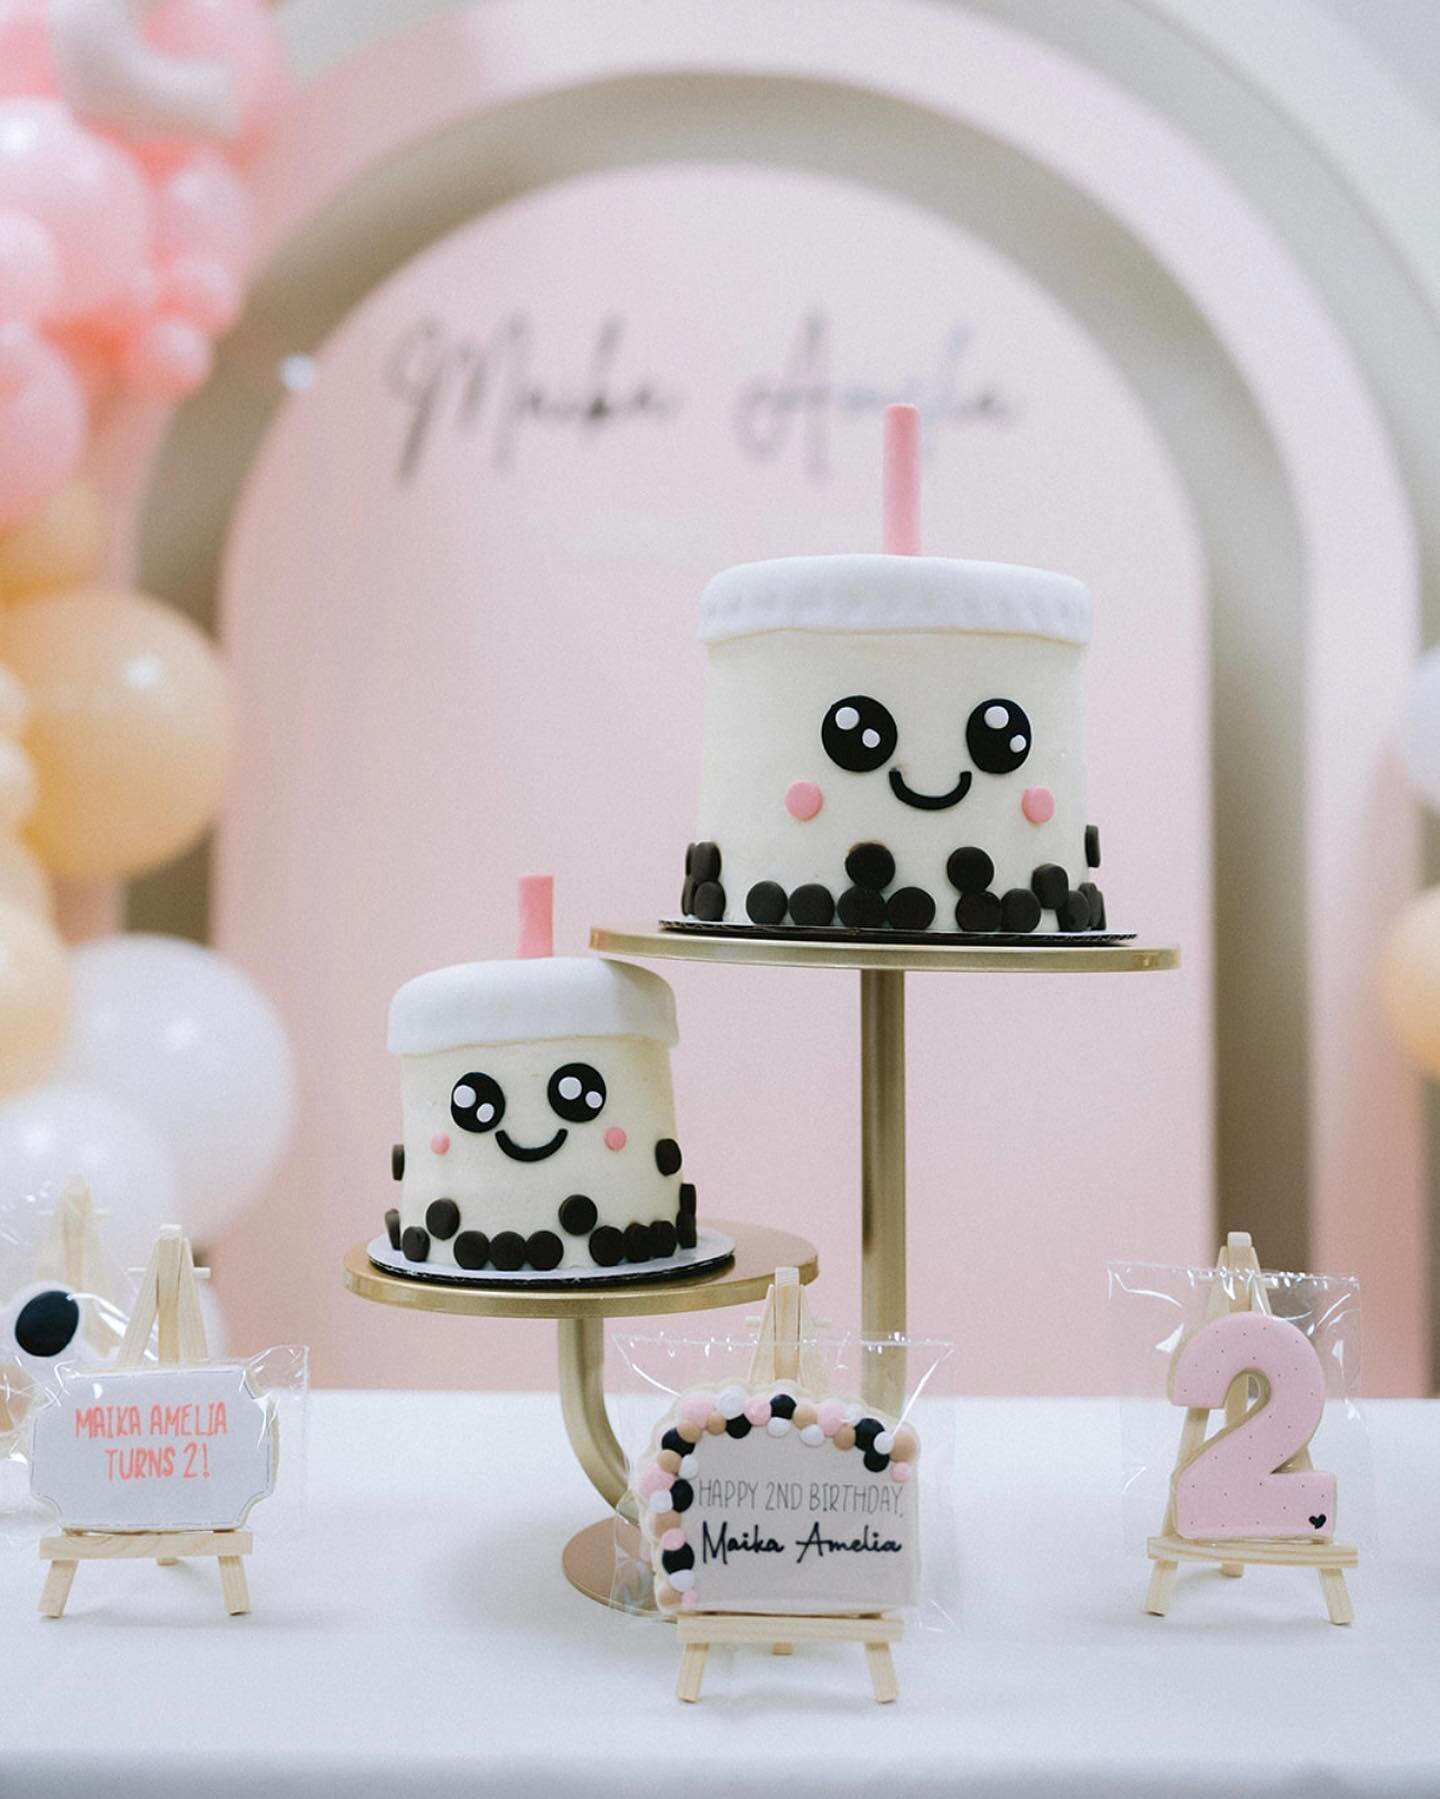 We were part of the most adorable Boba Birthday party! From a boba cake, to a mini version of our boba cart *hehe, this party was a hit. Thanks for having us!

Photo: @aikafoz 
Design: @gianevents.vanessa of @gianevents 
Arch installation: @onthewall